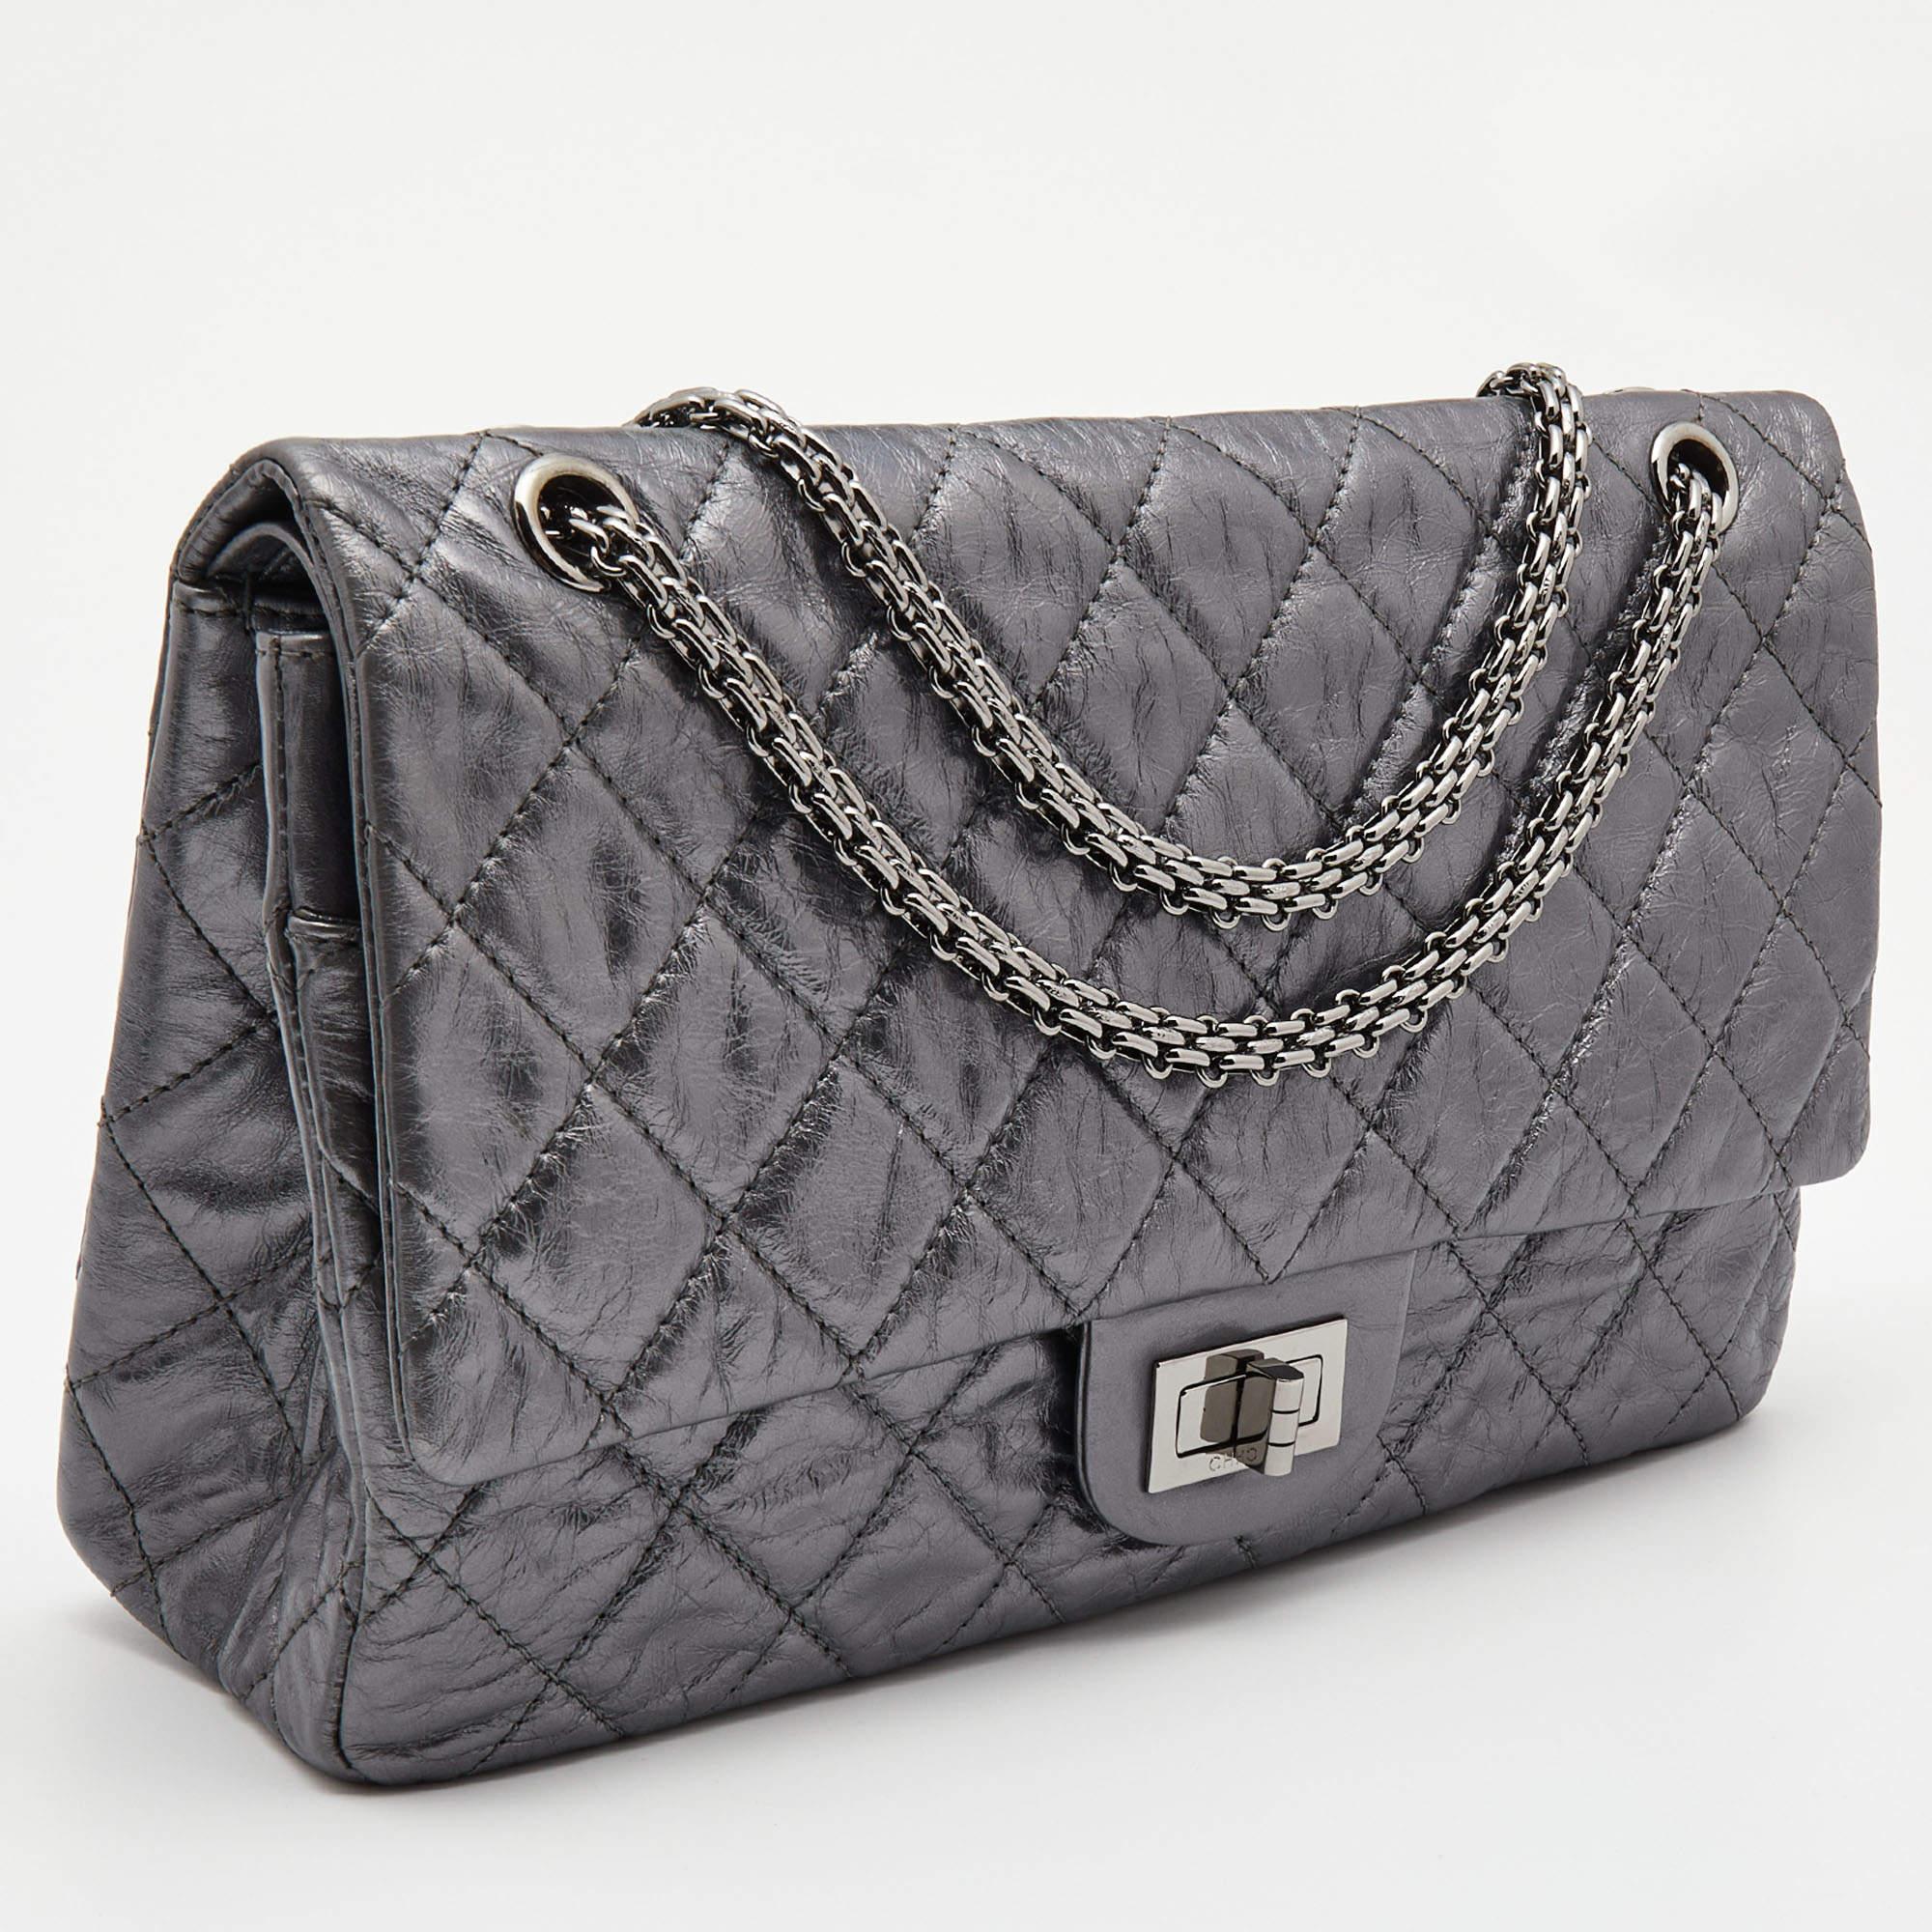 Chanel Metallic Grey Quilted Leather Reissue 2.55 Classic 227 Flap Bag In Good Condition In Dubai, Al Qouz 2